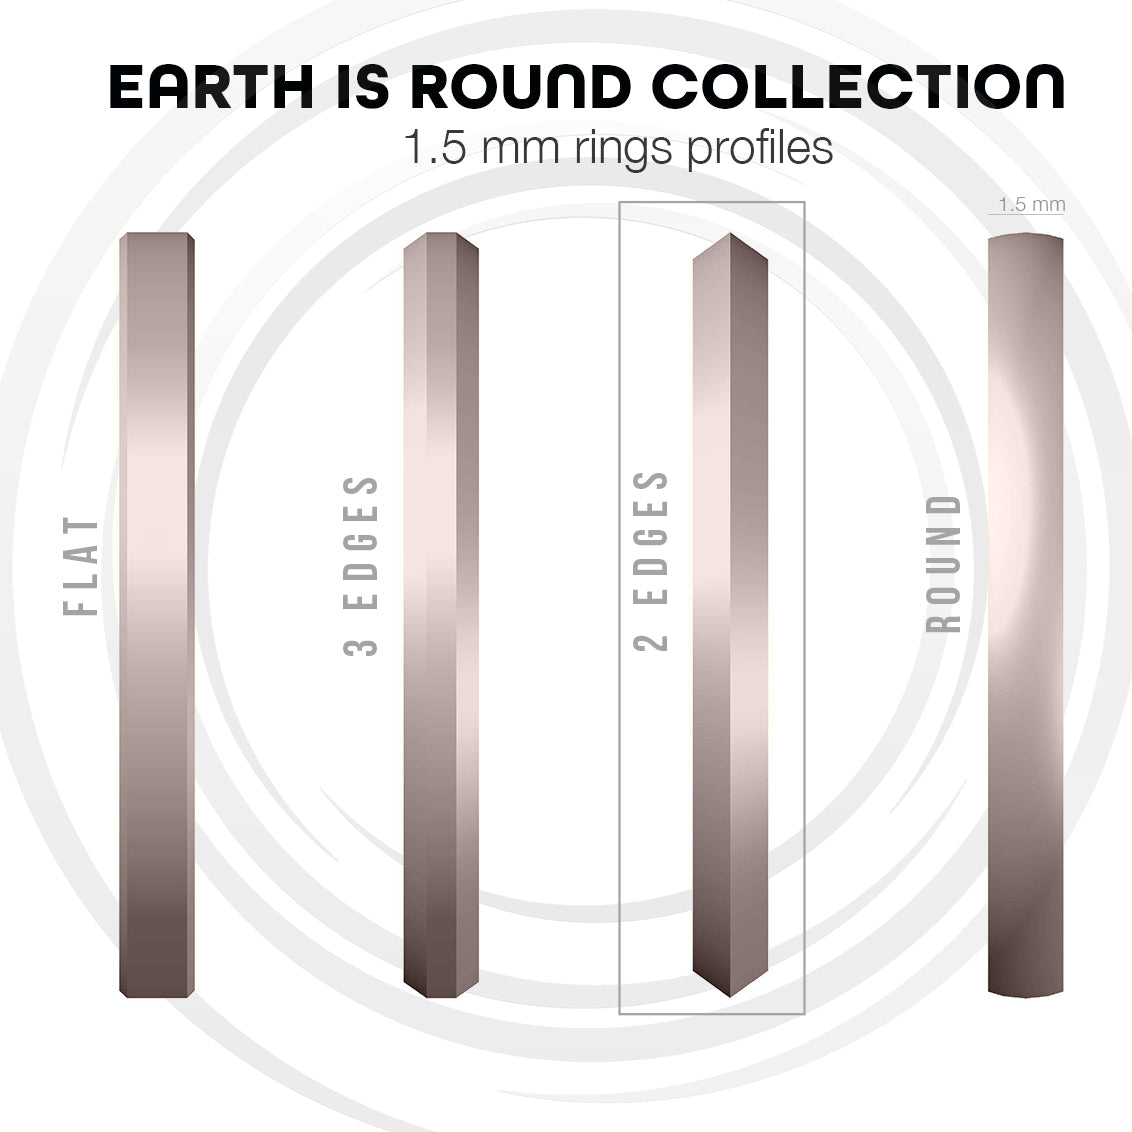 Bague EARTH IS ROUND 1.5mm profil deux bords or rouge 18 carats